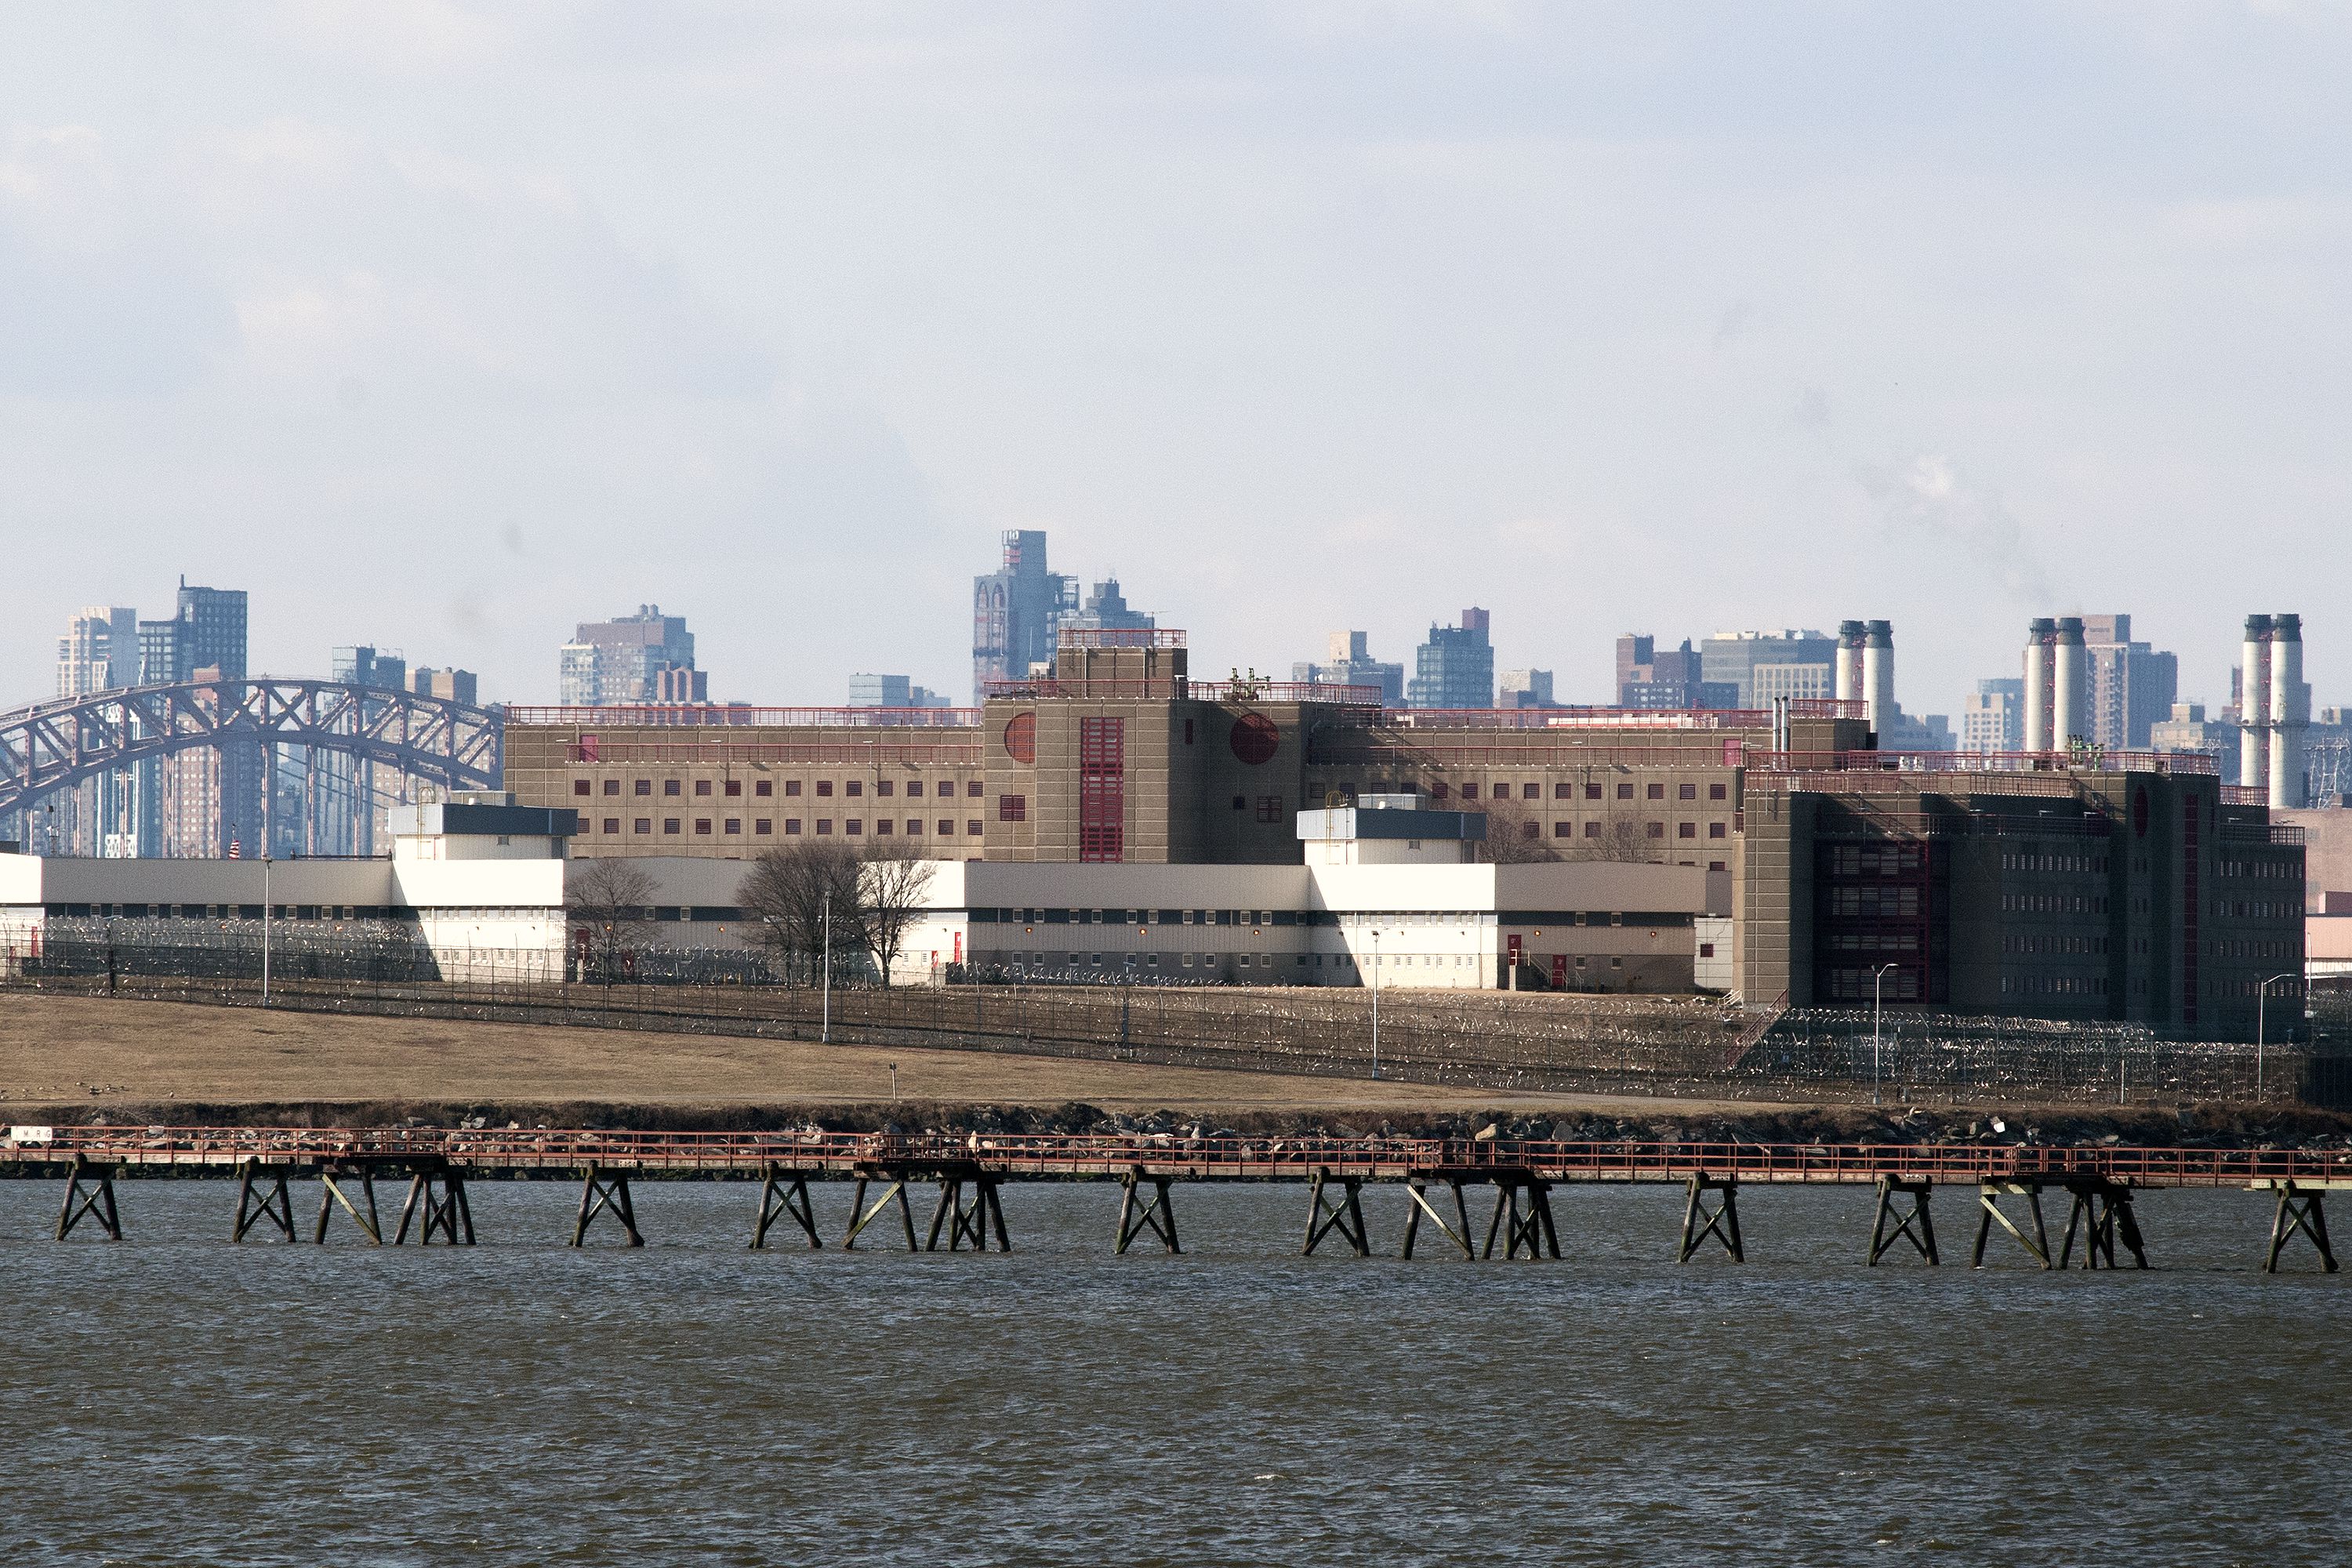 The George R. Vierno Center on Rikers Island was visible from Queens, Jan. 25, 2019.